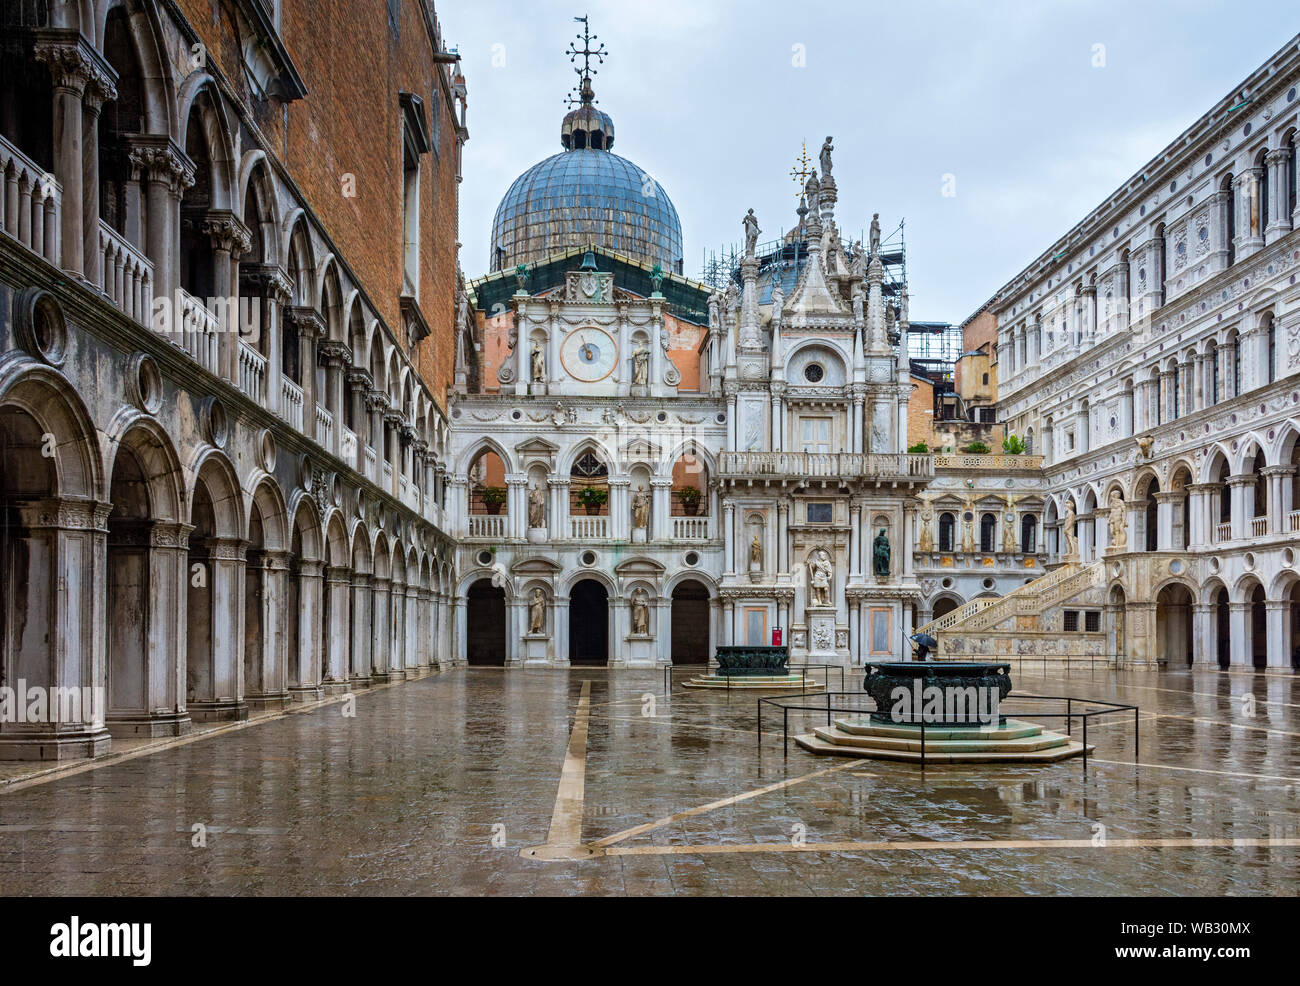 The courtyard of the Doge's Palace (Palazzo Ducale), Venice, Italy Stock Photo